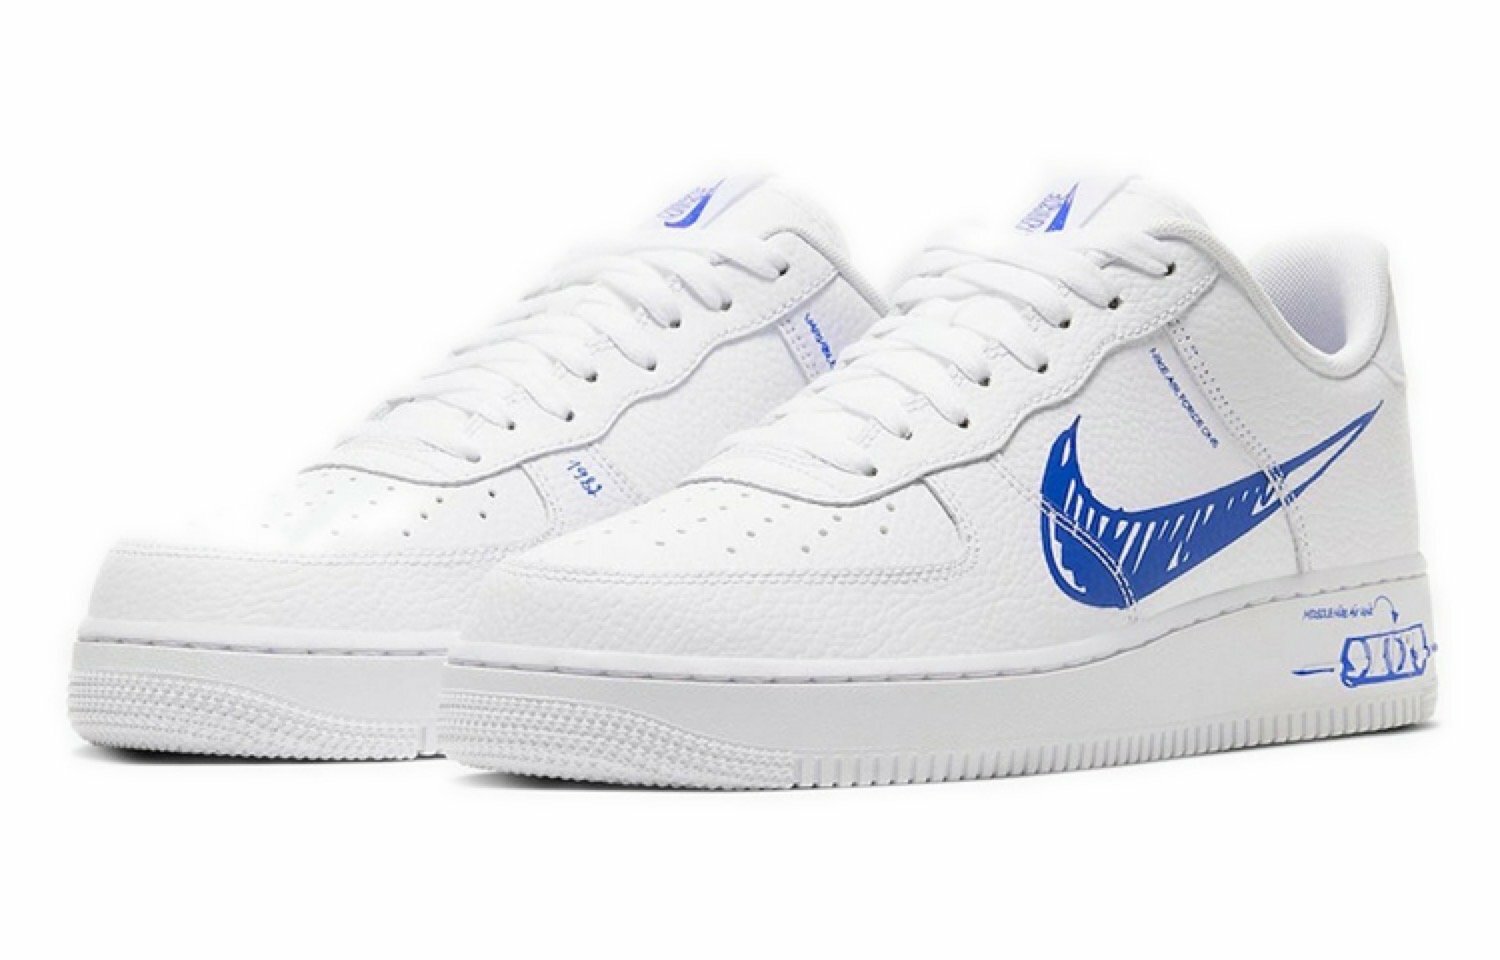 Air Force 1 Low Sketch "White & Blue"